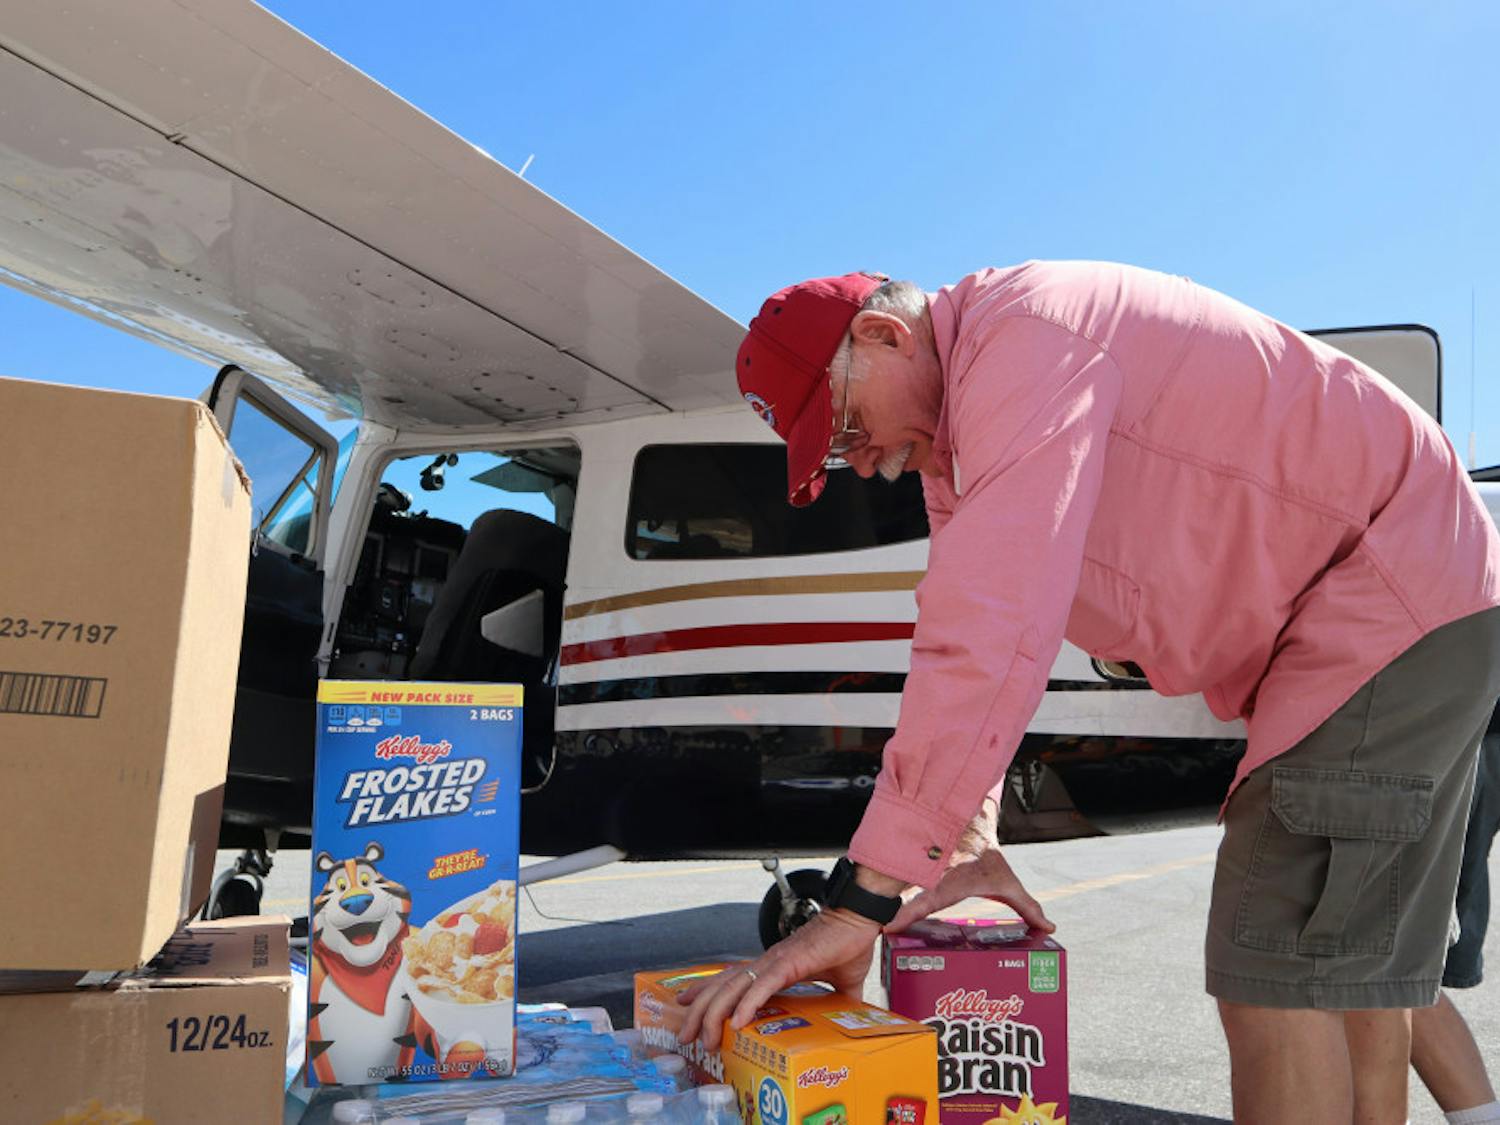 Pilot Mark Creighton, of Port Aransas, Texas, loads nonperishable food onto a plane headed to Appalachia, Florida, for Operation Airdrop. His home flooded during Hurricane Harvey, and he’s helped other victims of hurricanes through Operation Airdrop since.